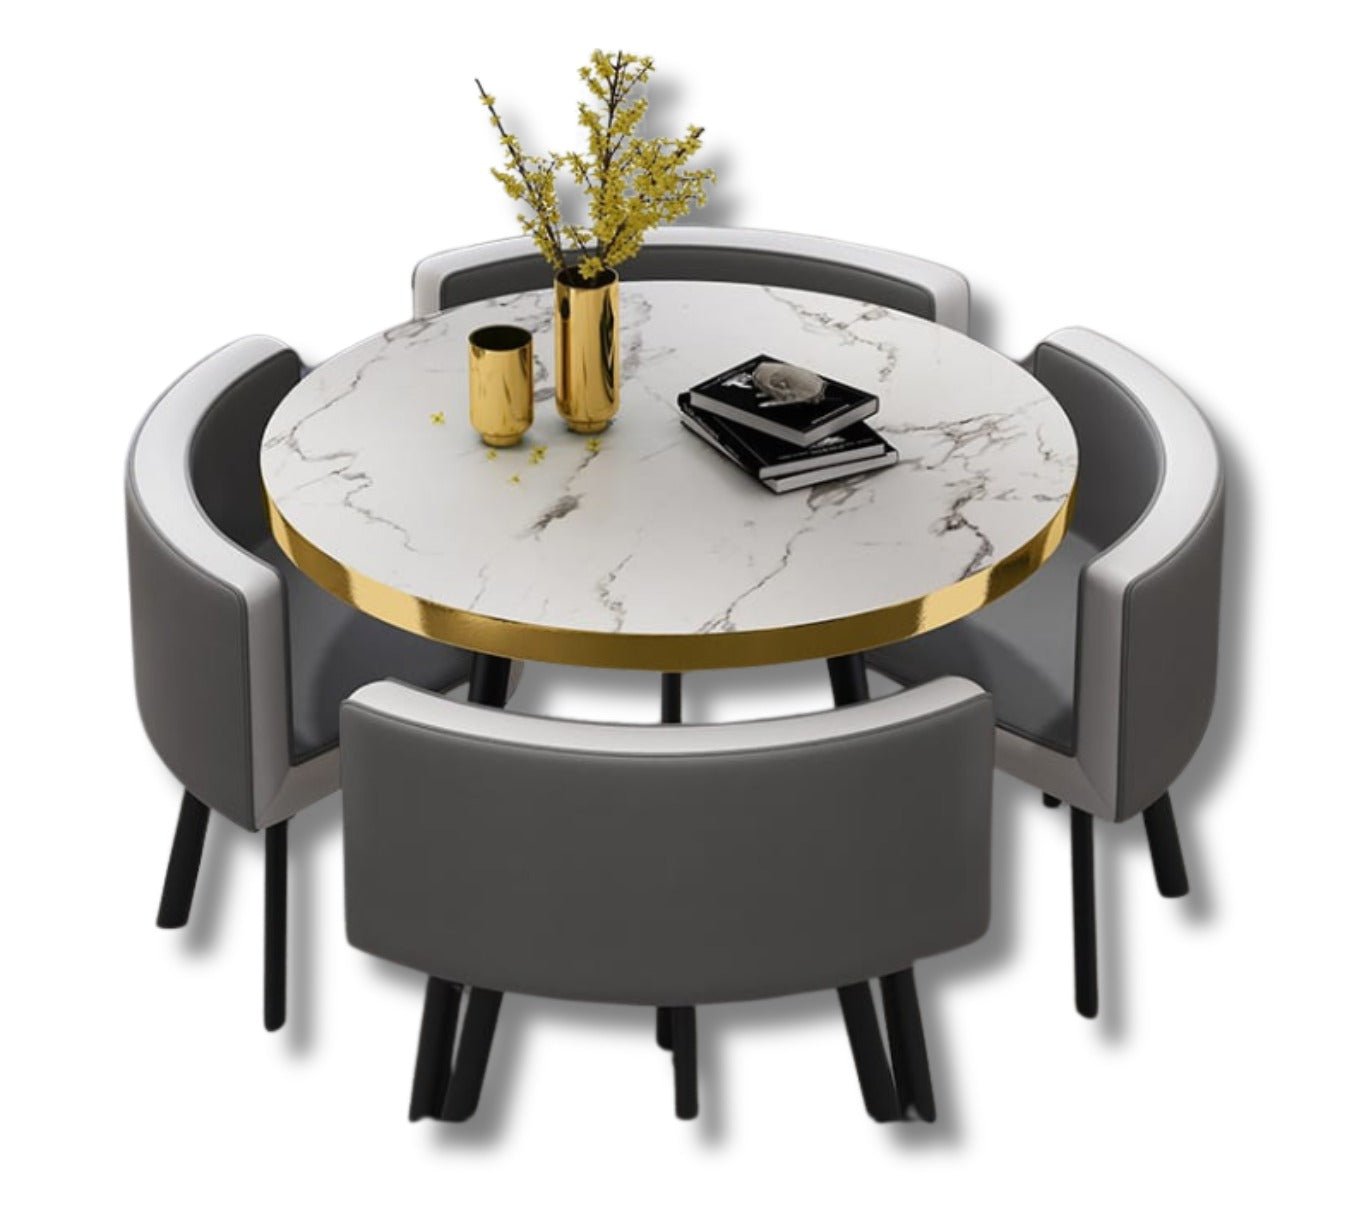 Round marble table set - That Couch Place